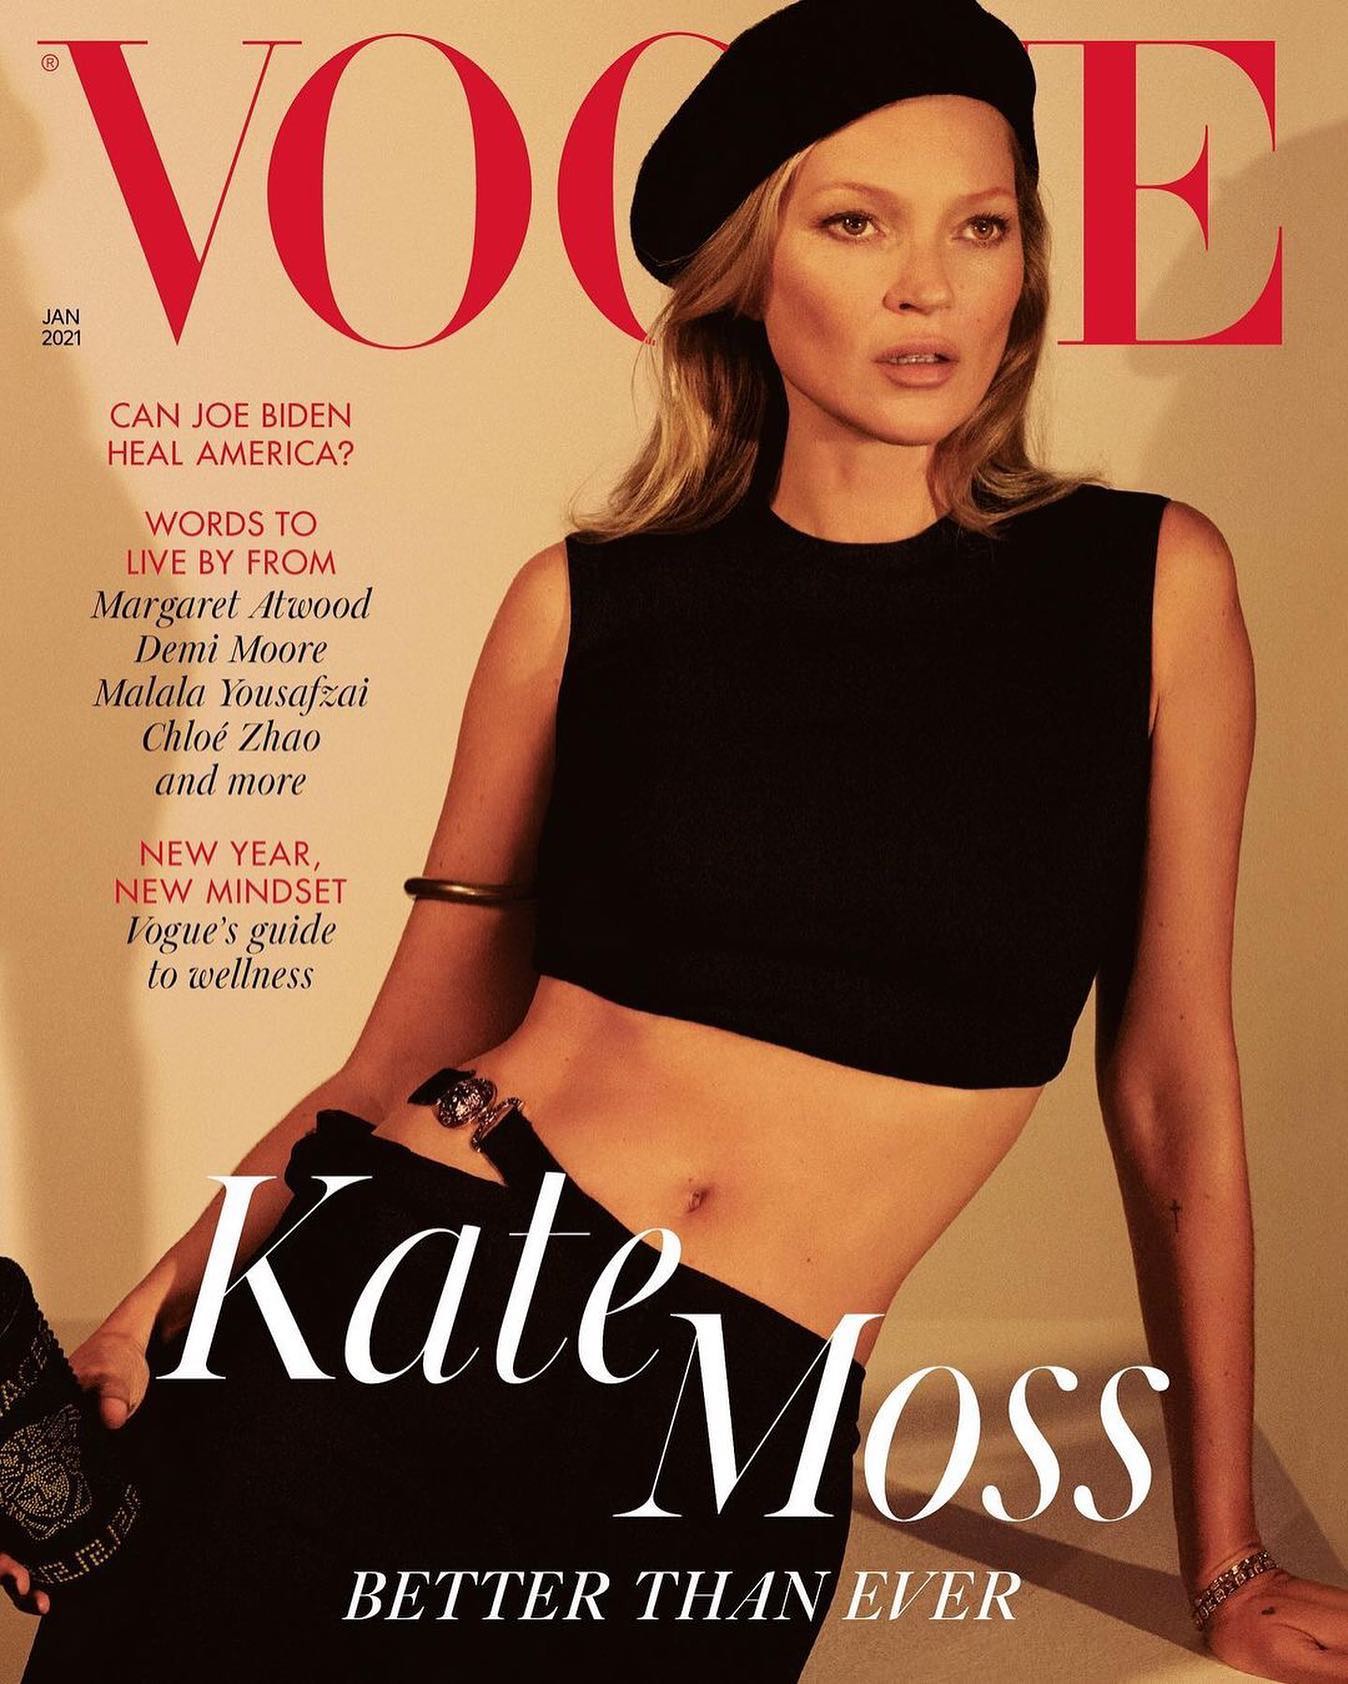 DIARY OF A CLOTHESHORSE: Kate Moss covers January 2021